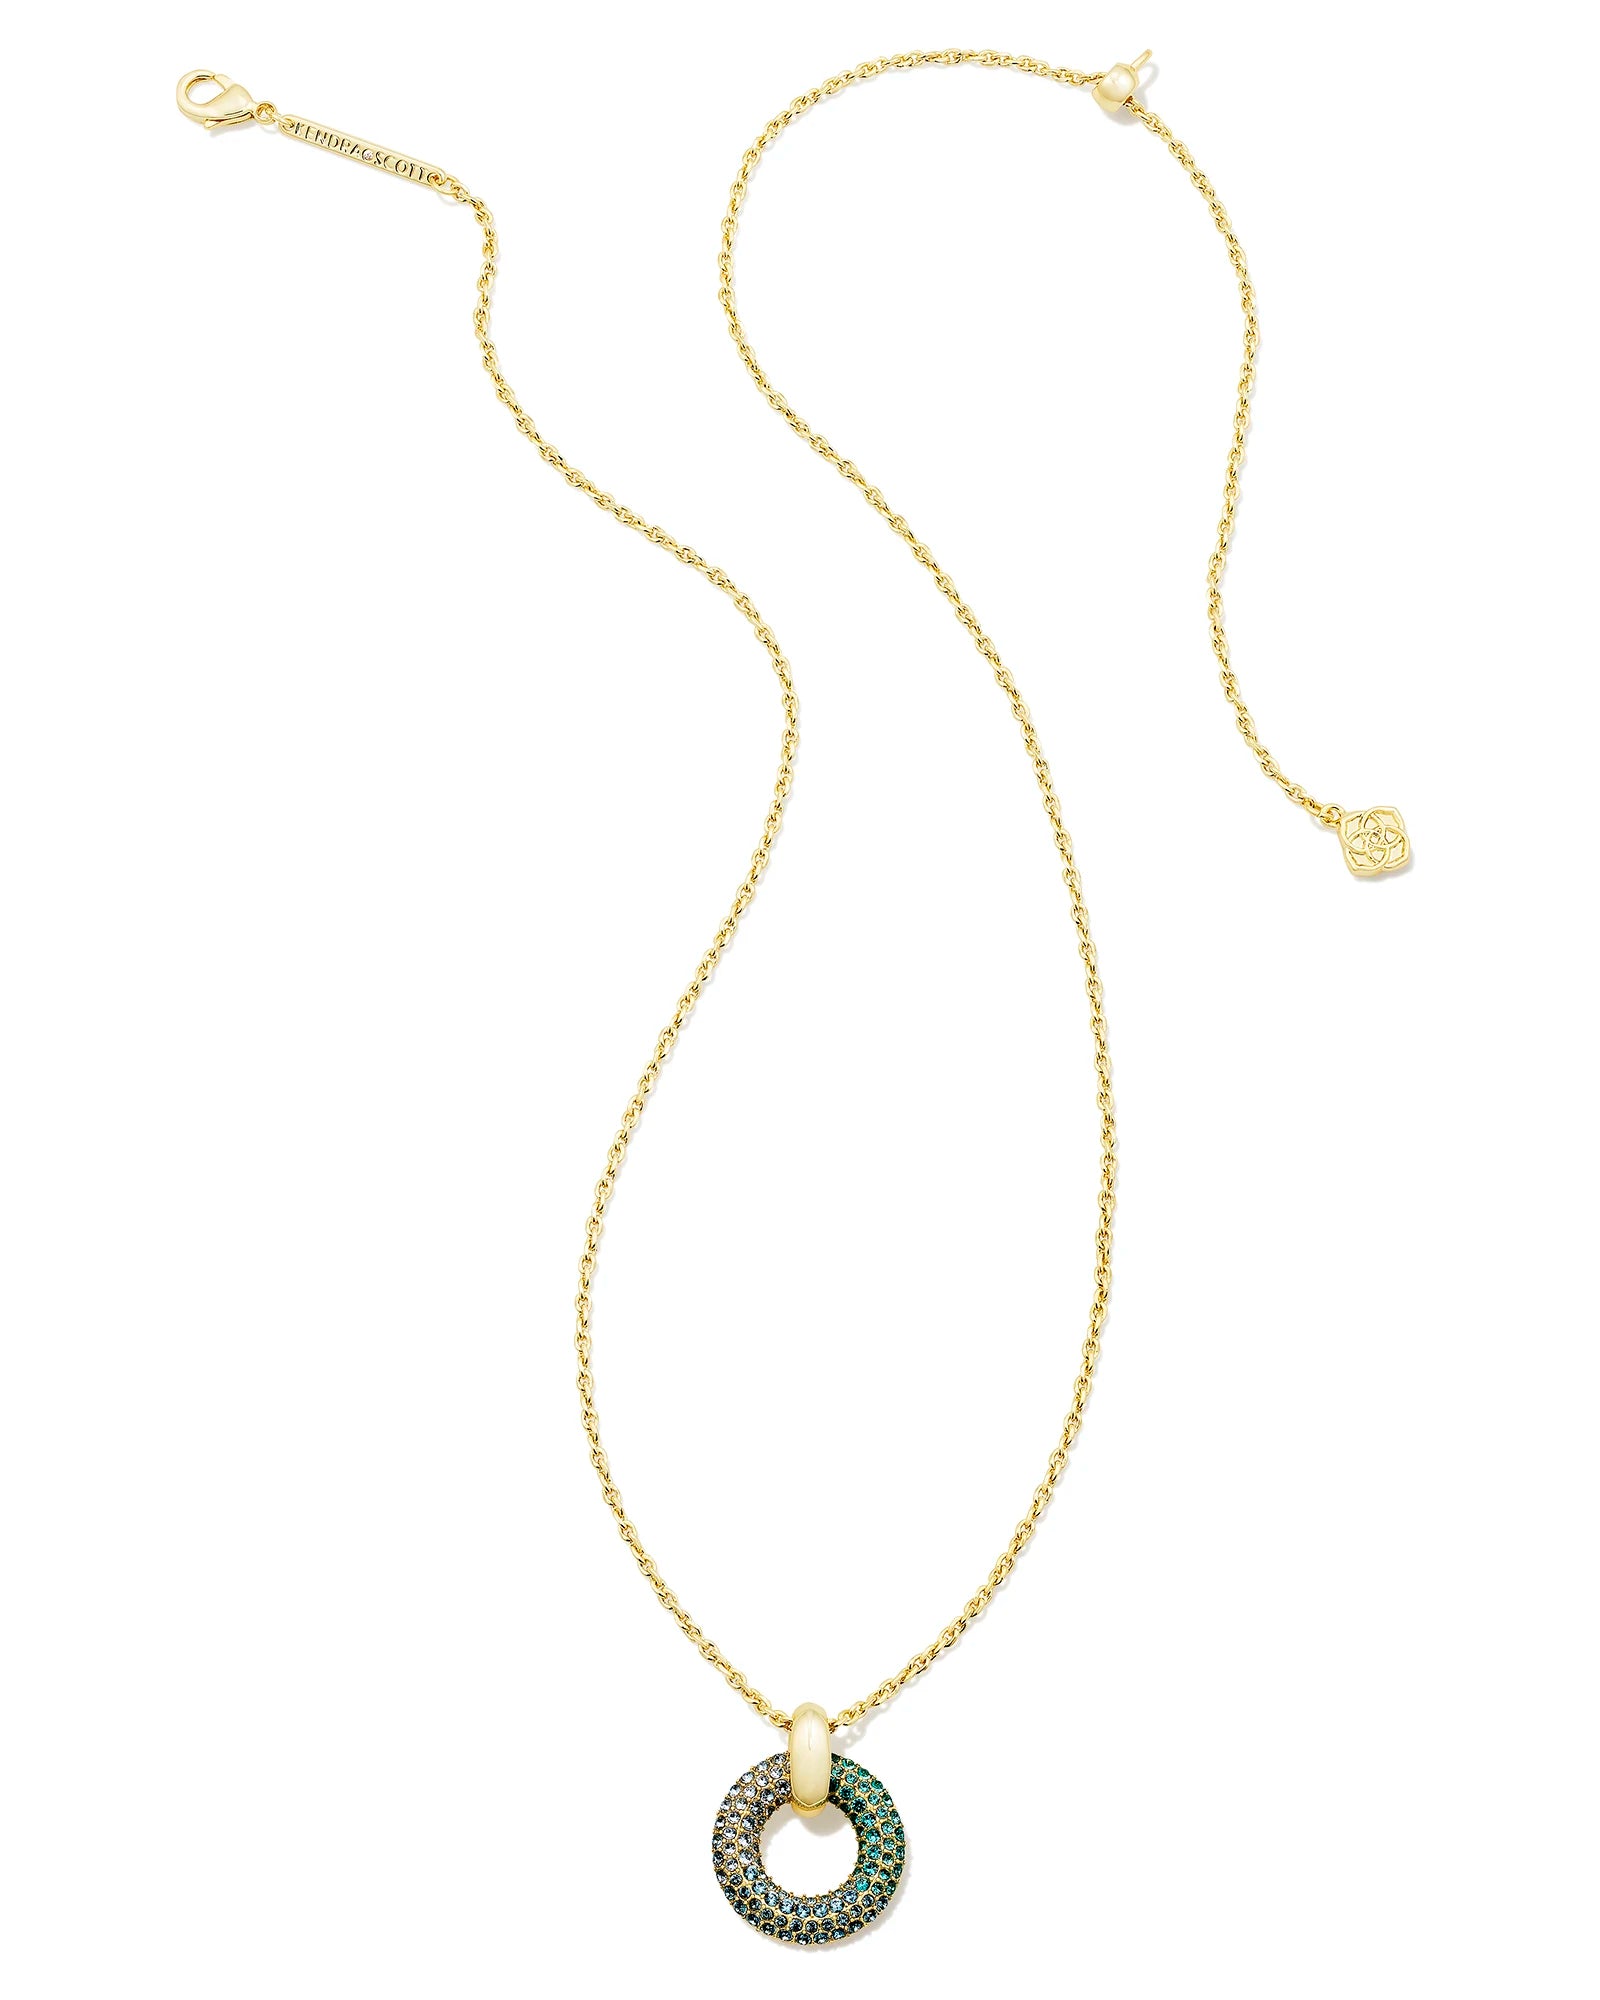 Kendra Scott Mikki Pave Short Pendant Necklace Gold Green Blue Ombre Mix-Necklaces-Kendra Scott-N00337GLD-The Twisted Chandelier